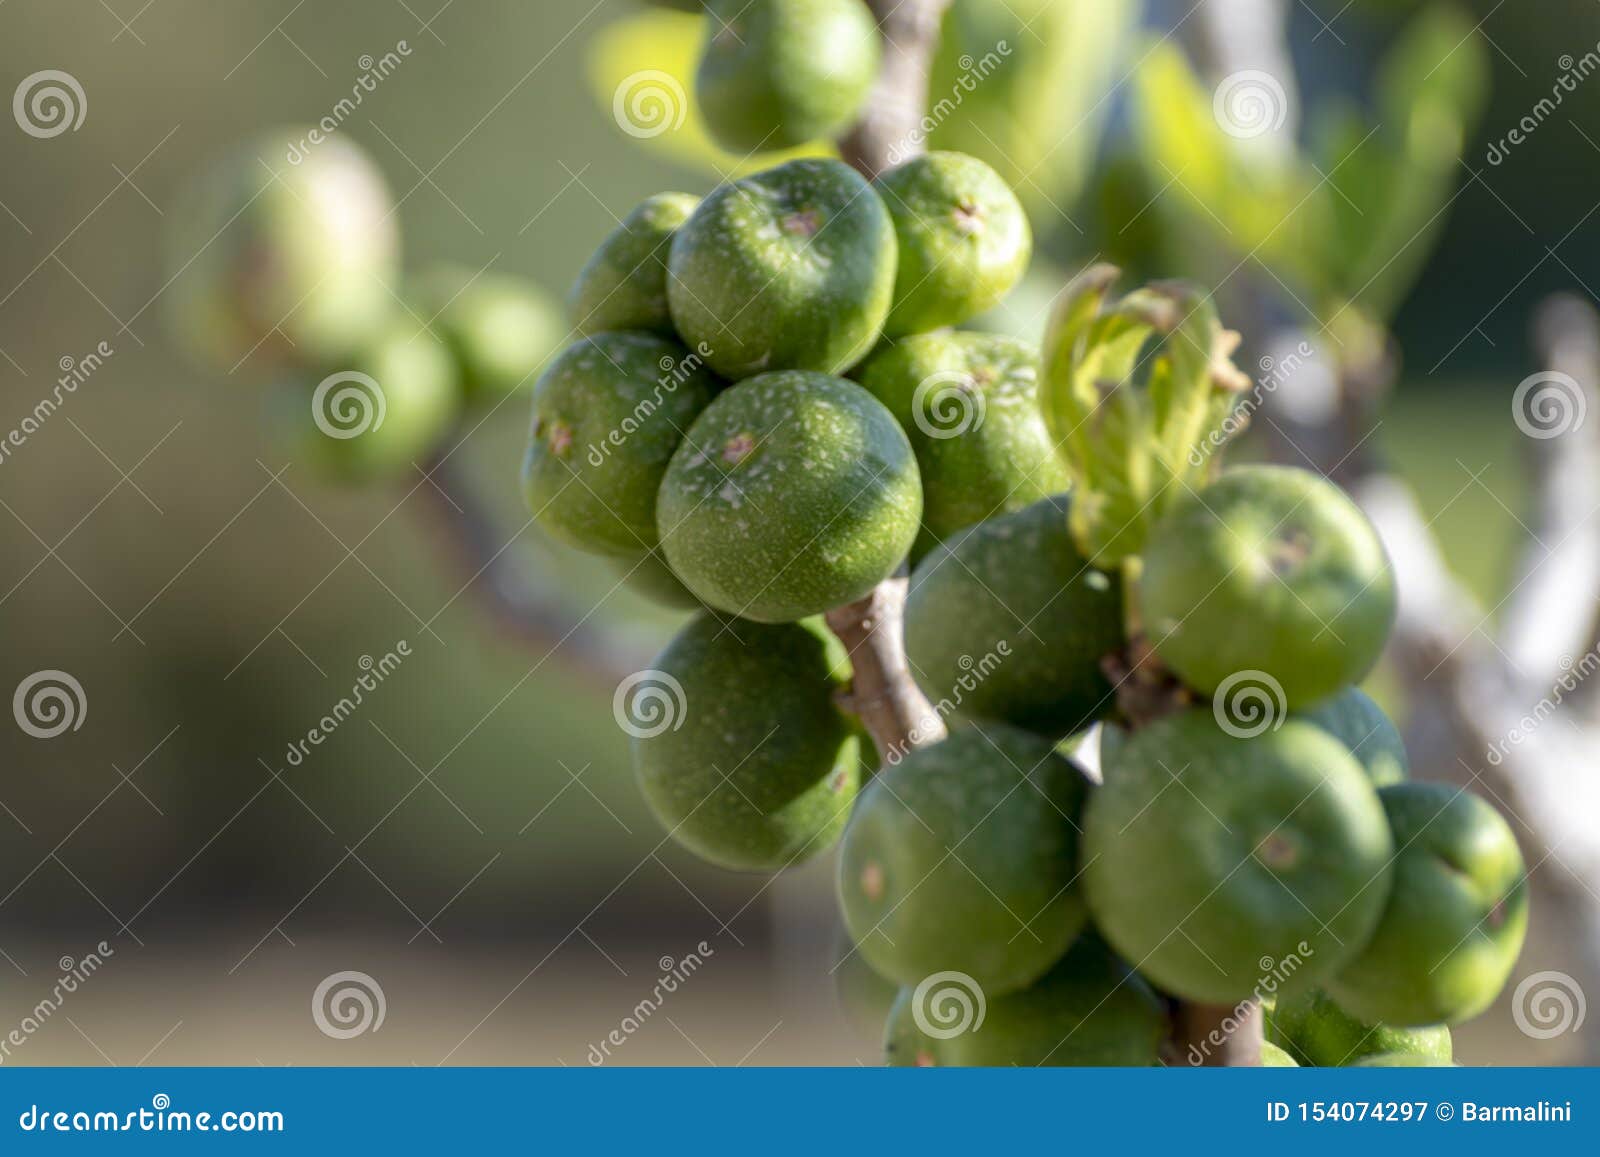 unripe figs dropping off tree